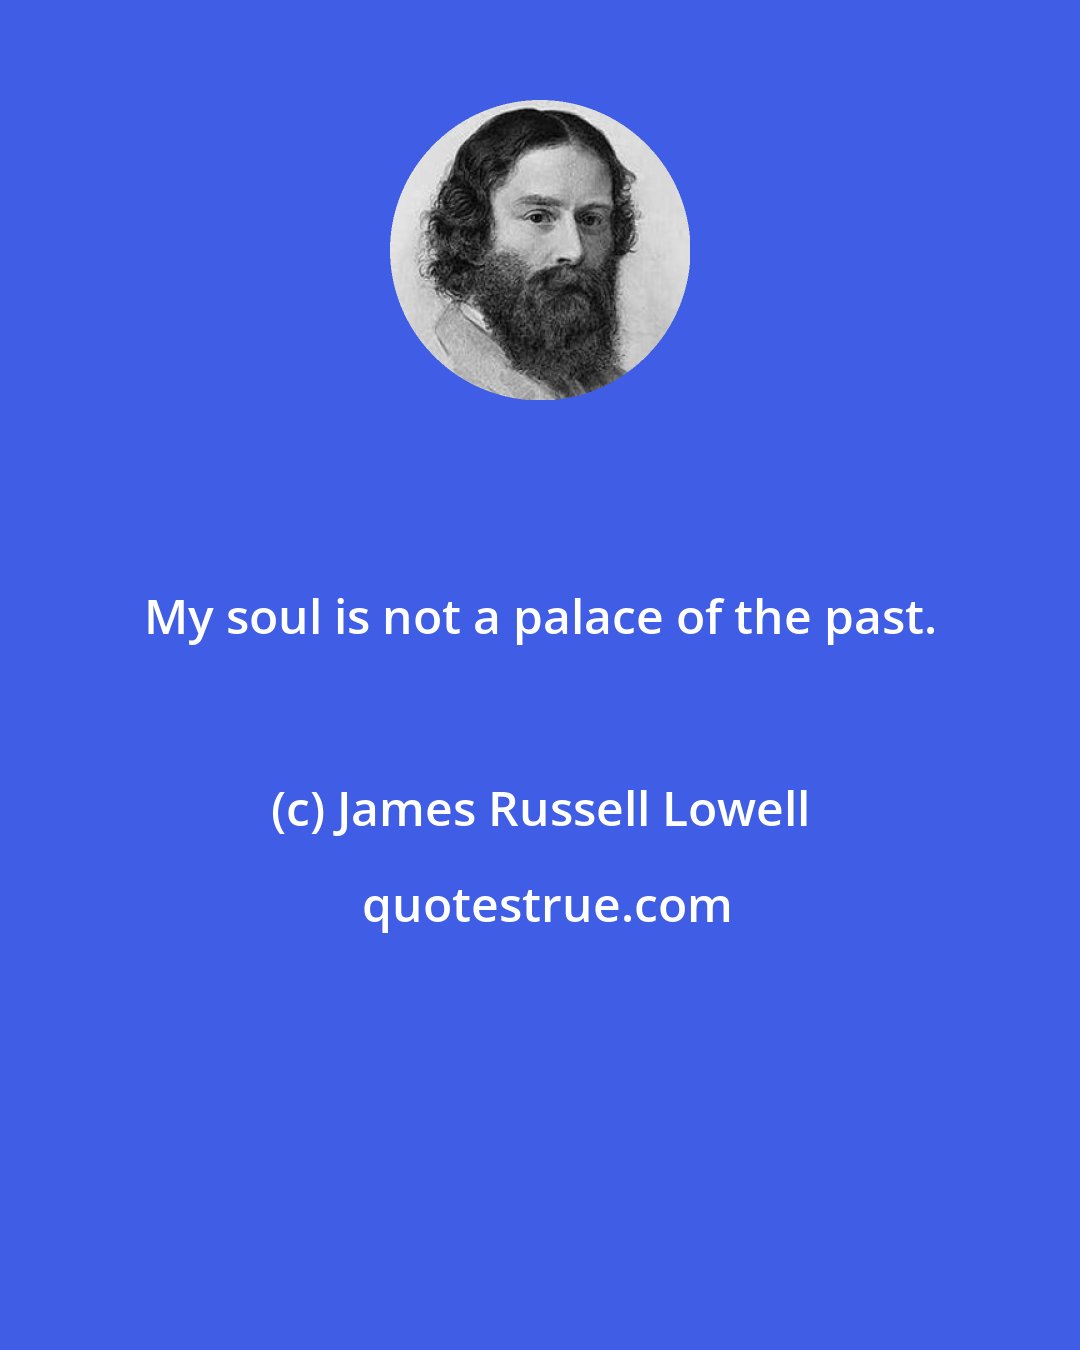 James Russell Lowell: My soul is not a palace of the past.